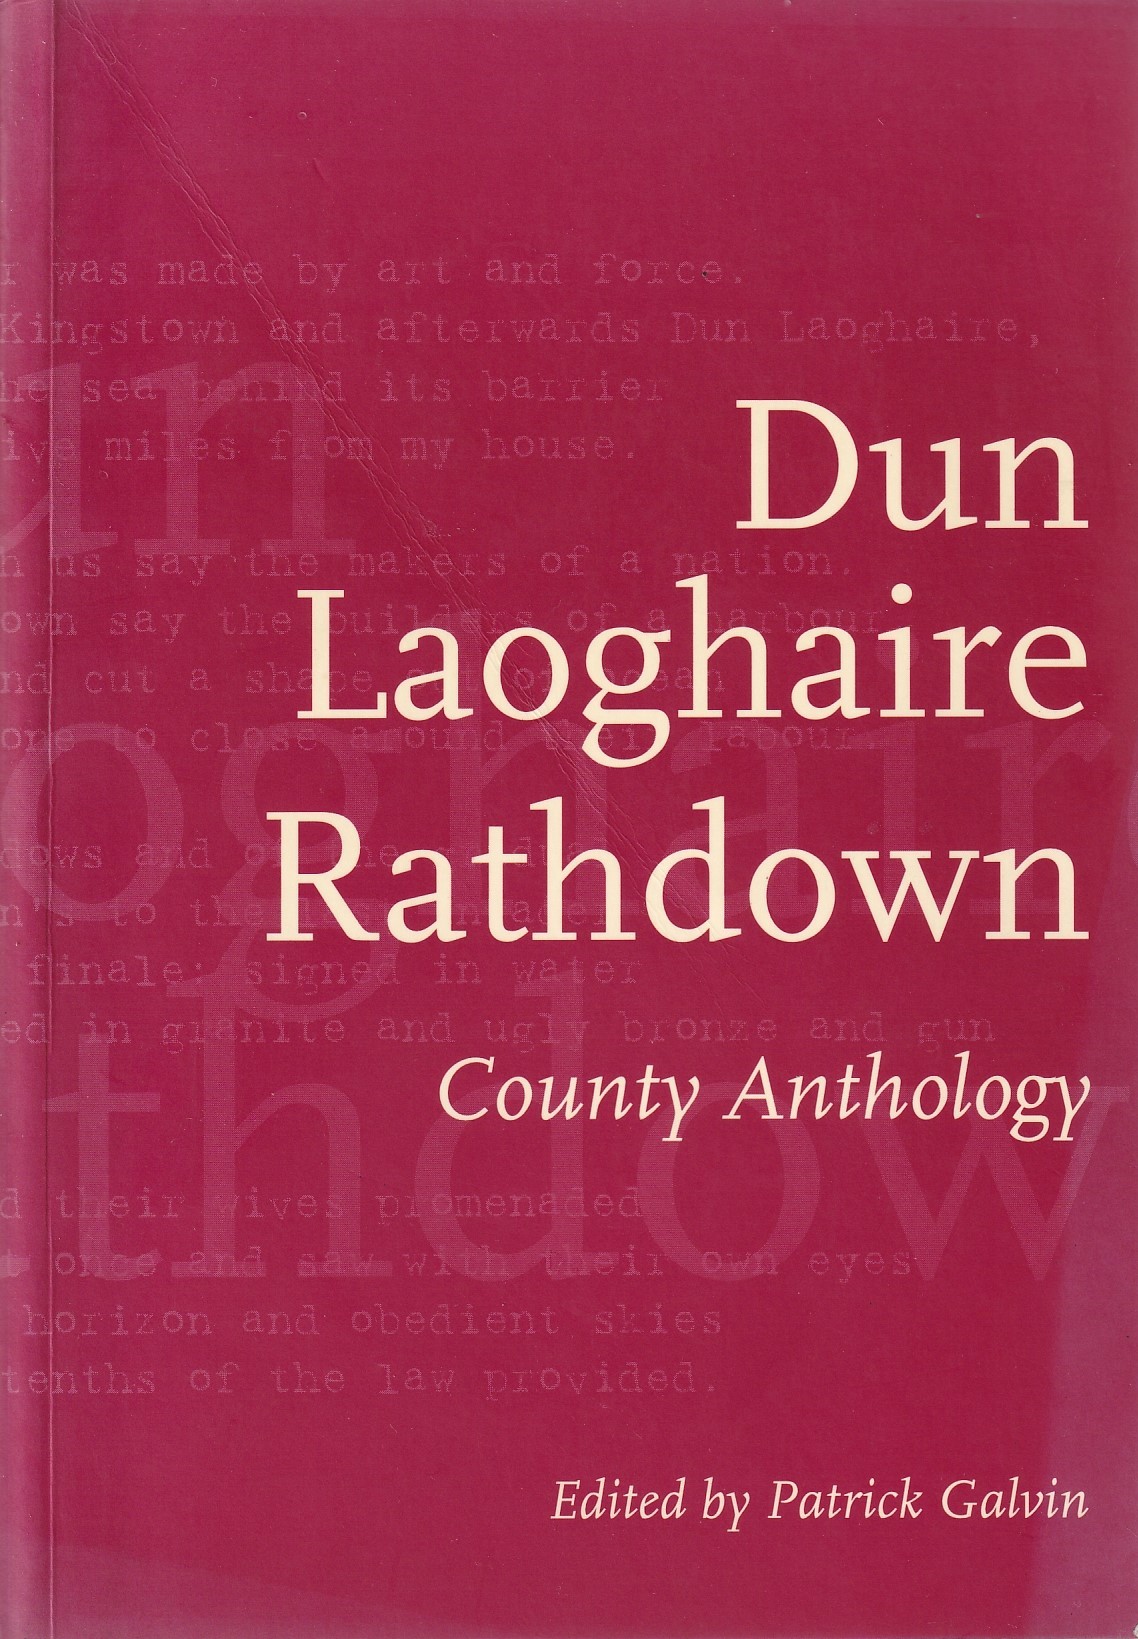 Dun Laoghaire Rathdown – County Anthology | Galvin Patrick ed. | Charlie Byrne's